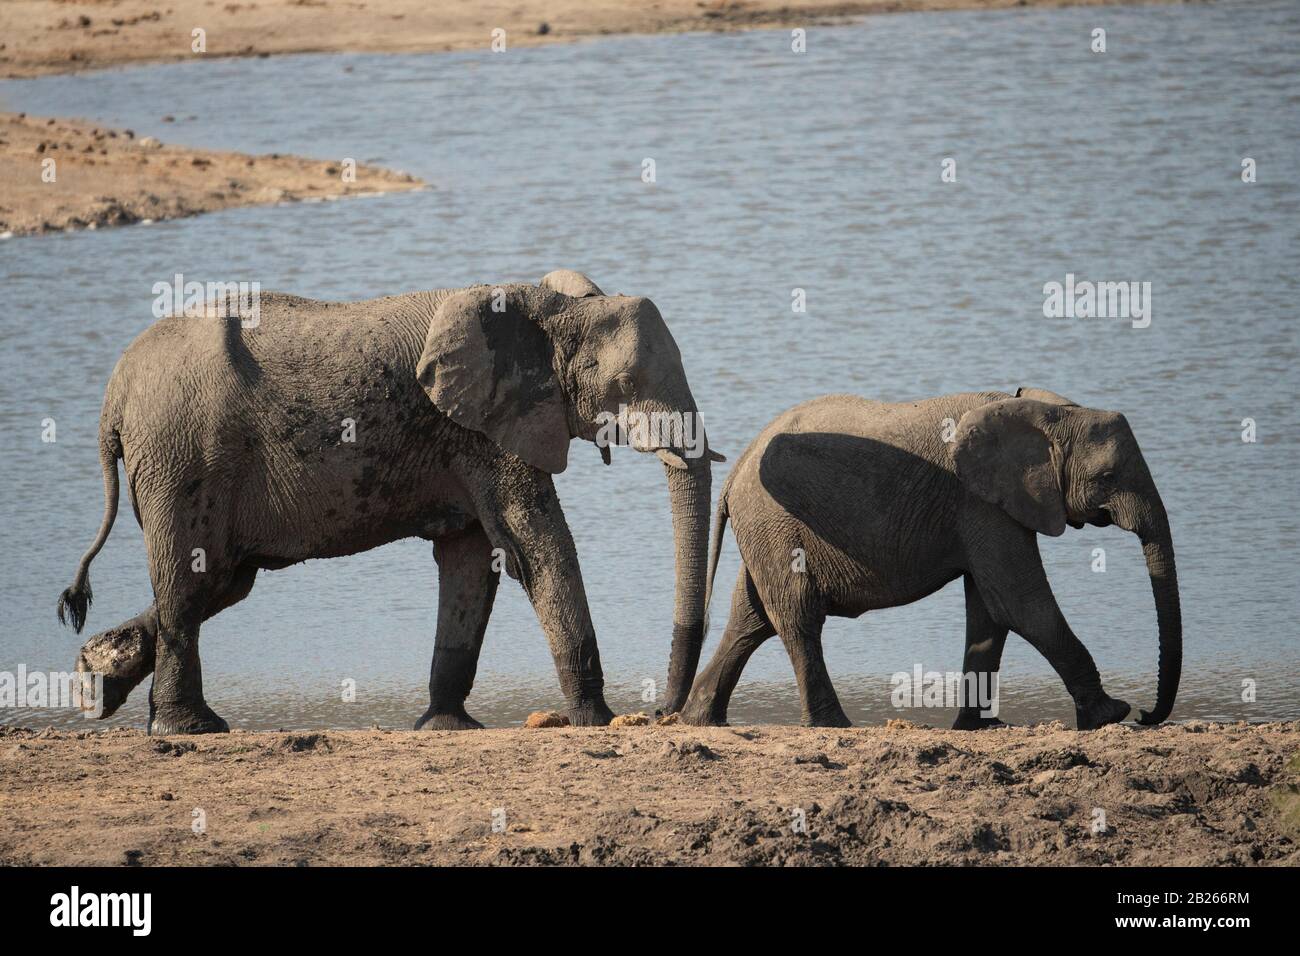 African elephants at a waterhole, Loxodonta africana africana, Kruger National Park, South Africa Stock Photo